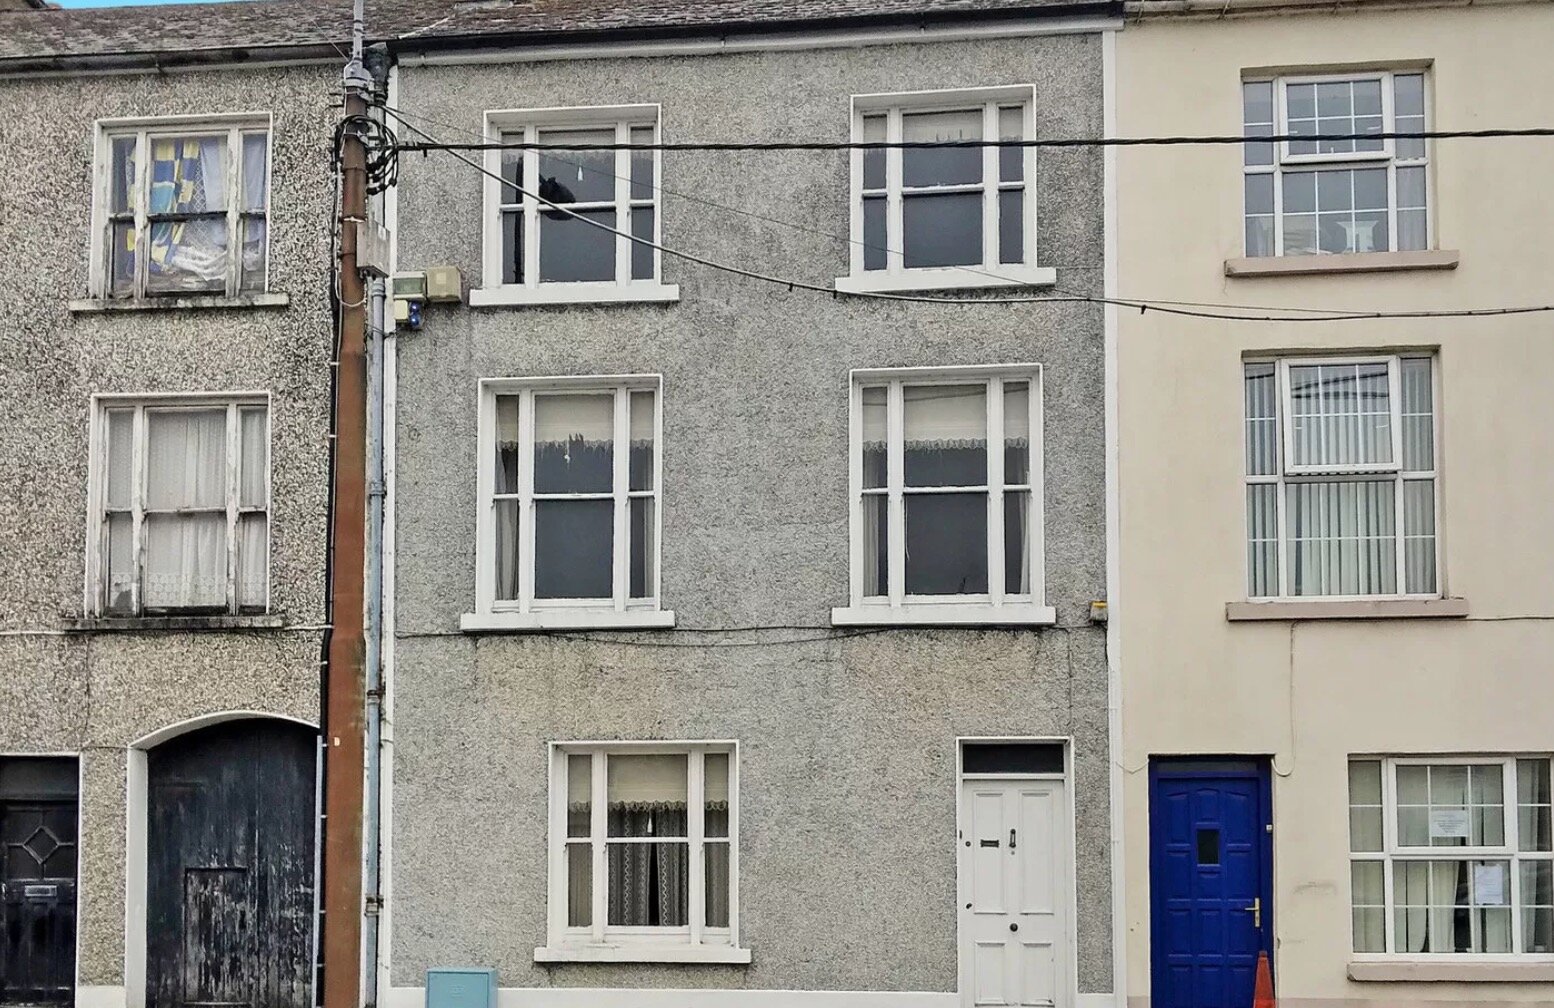 Main Street, Templemore, Co. Tipperary. €95k